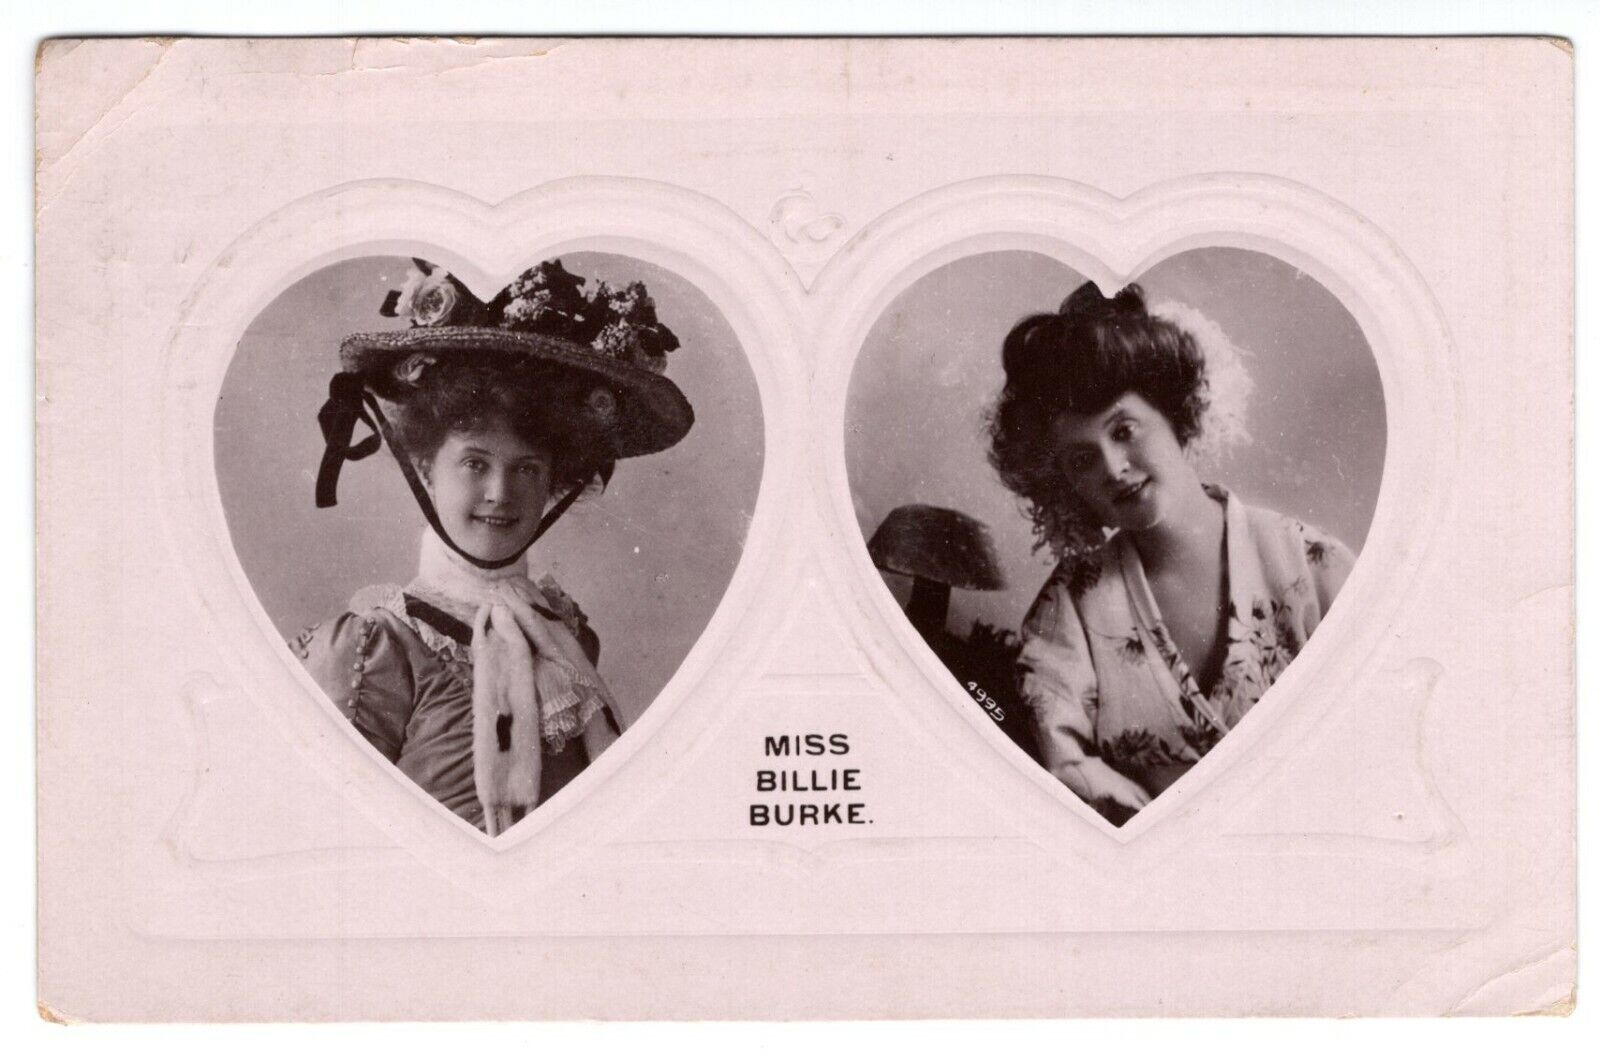 Miss Billie Burke Actress Real Photo Poster painting RPPC Postcard